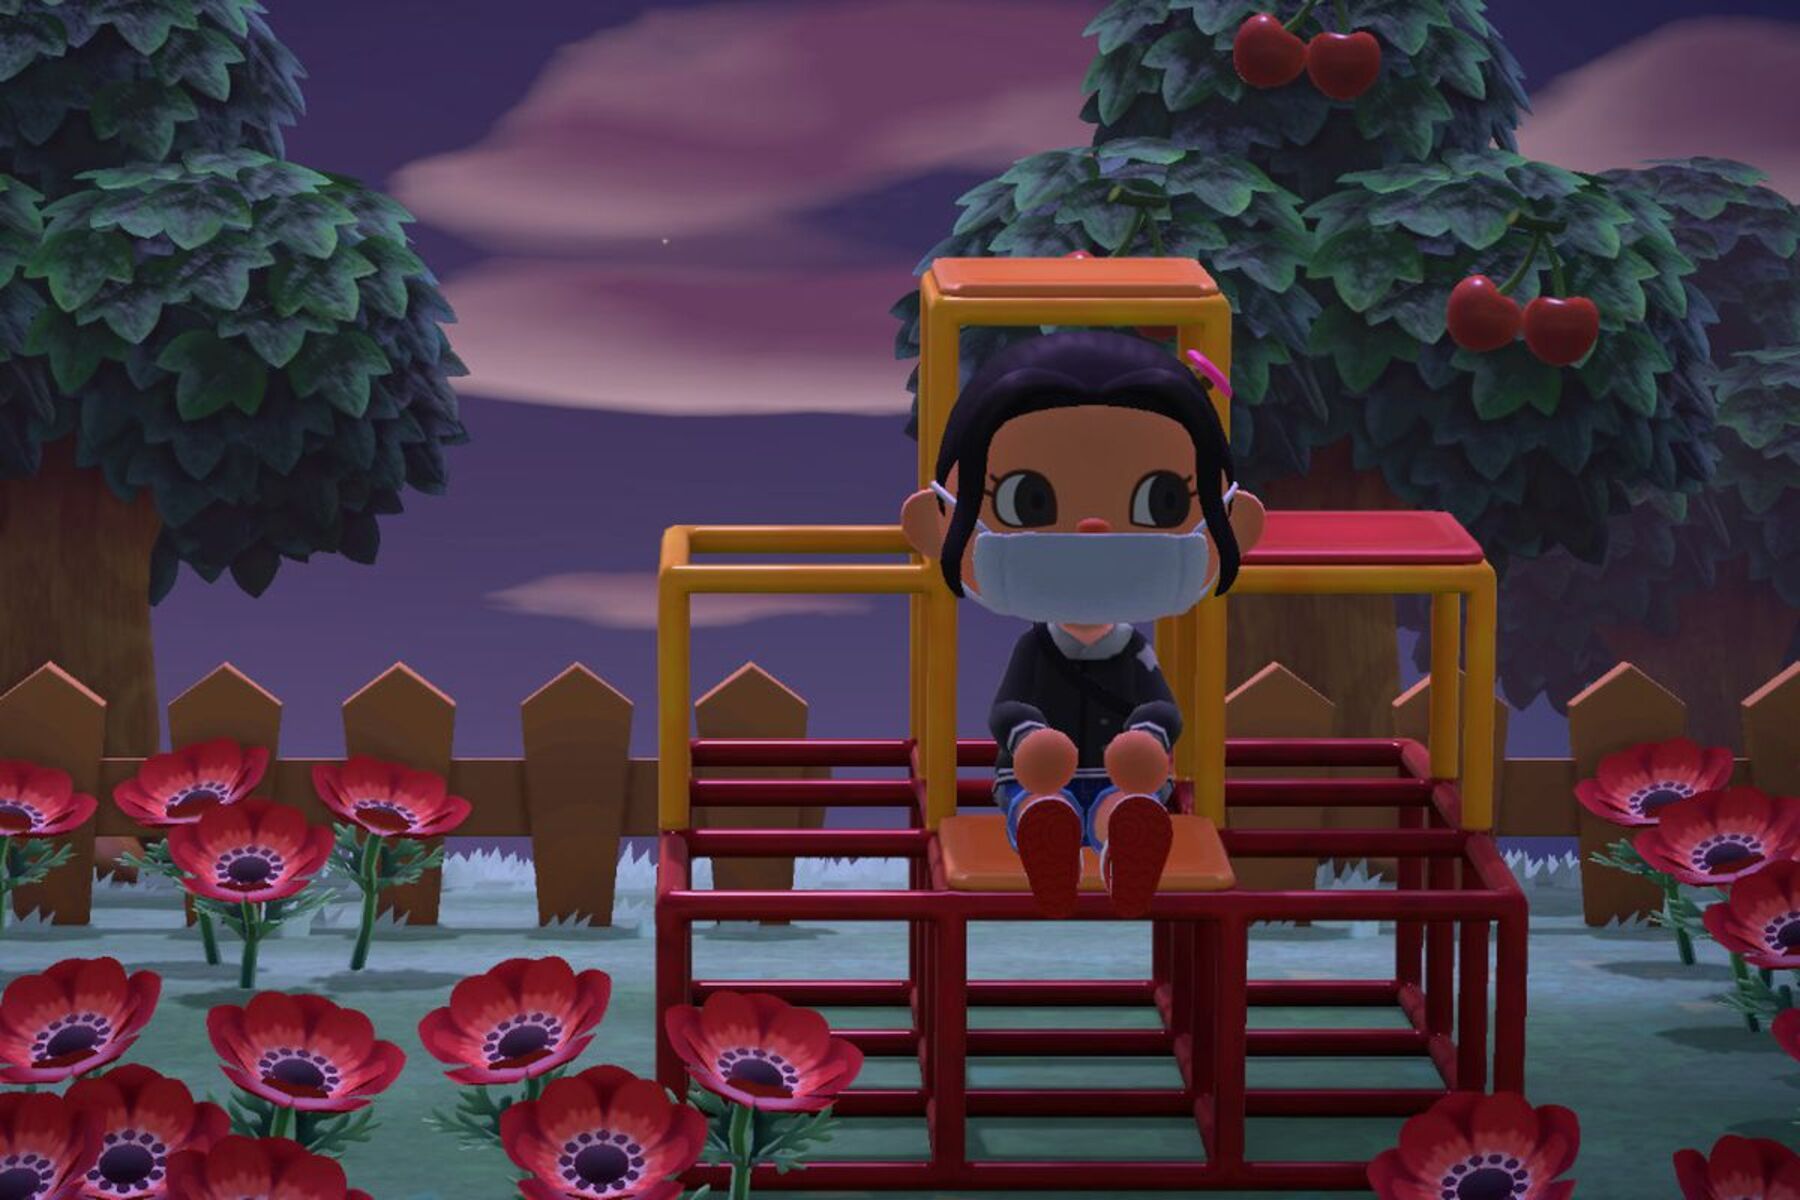 When Does A New Day Start In Animal Crossing?